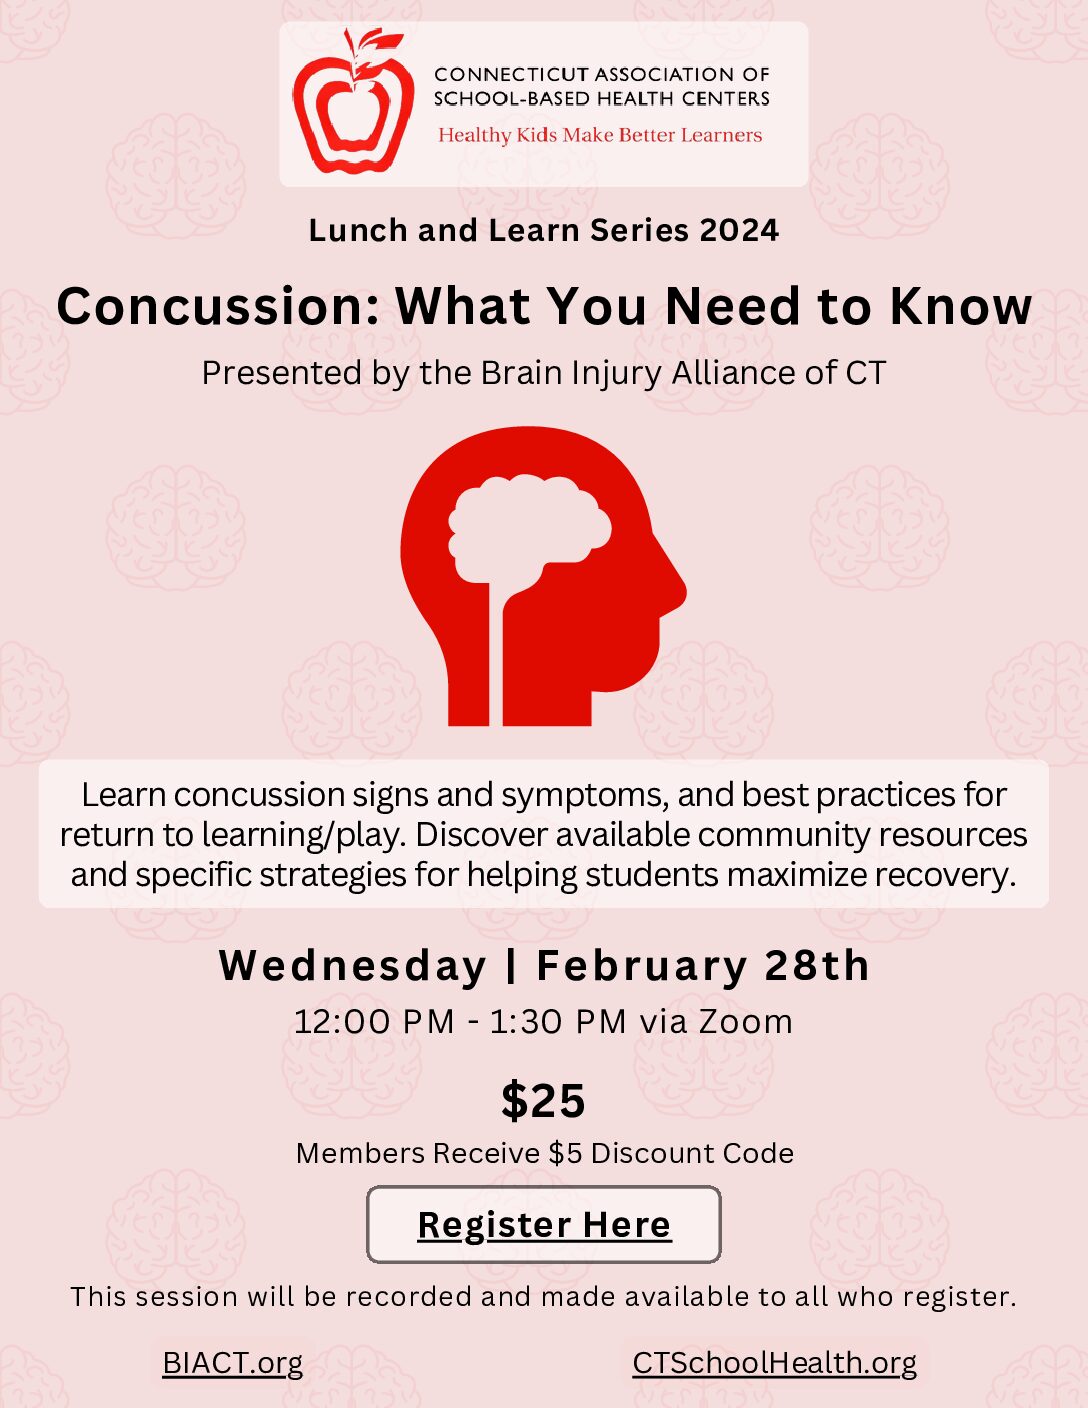 2-28-24 Lunch and Learn with the Brain Injury Alliance of CT